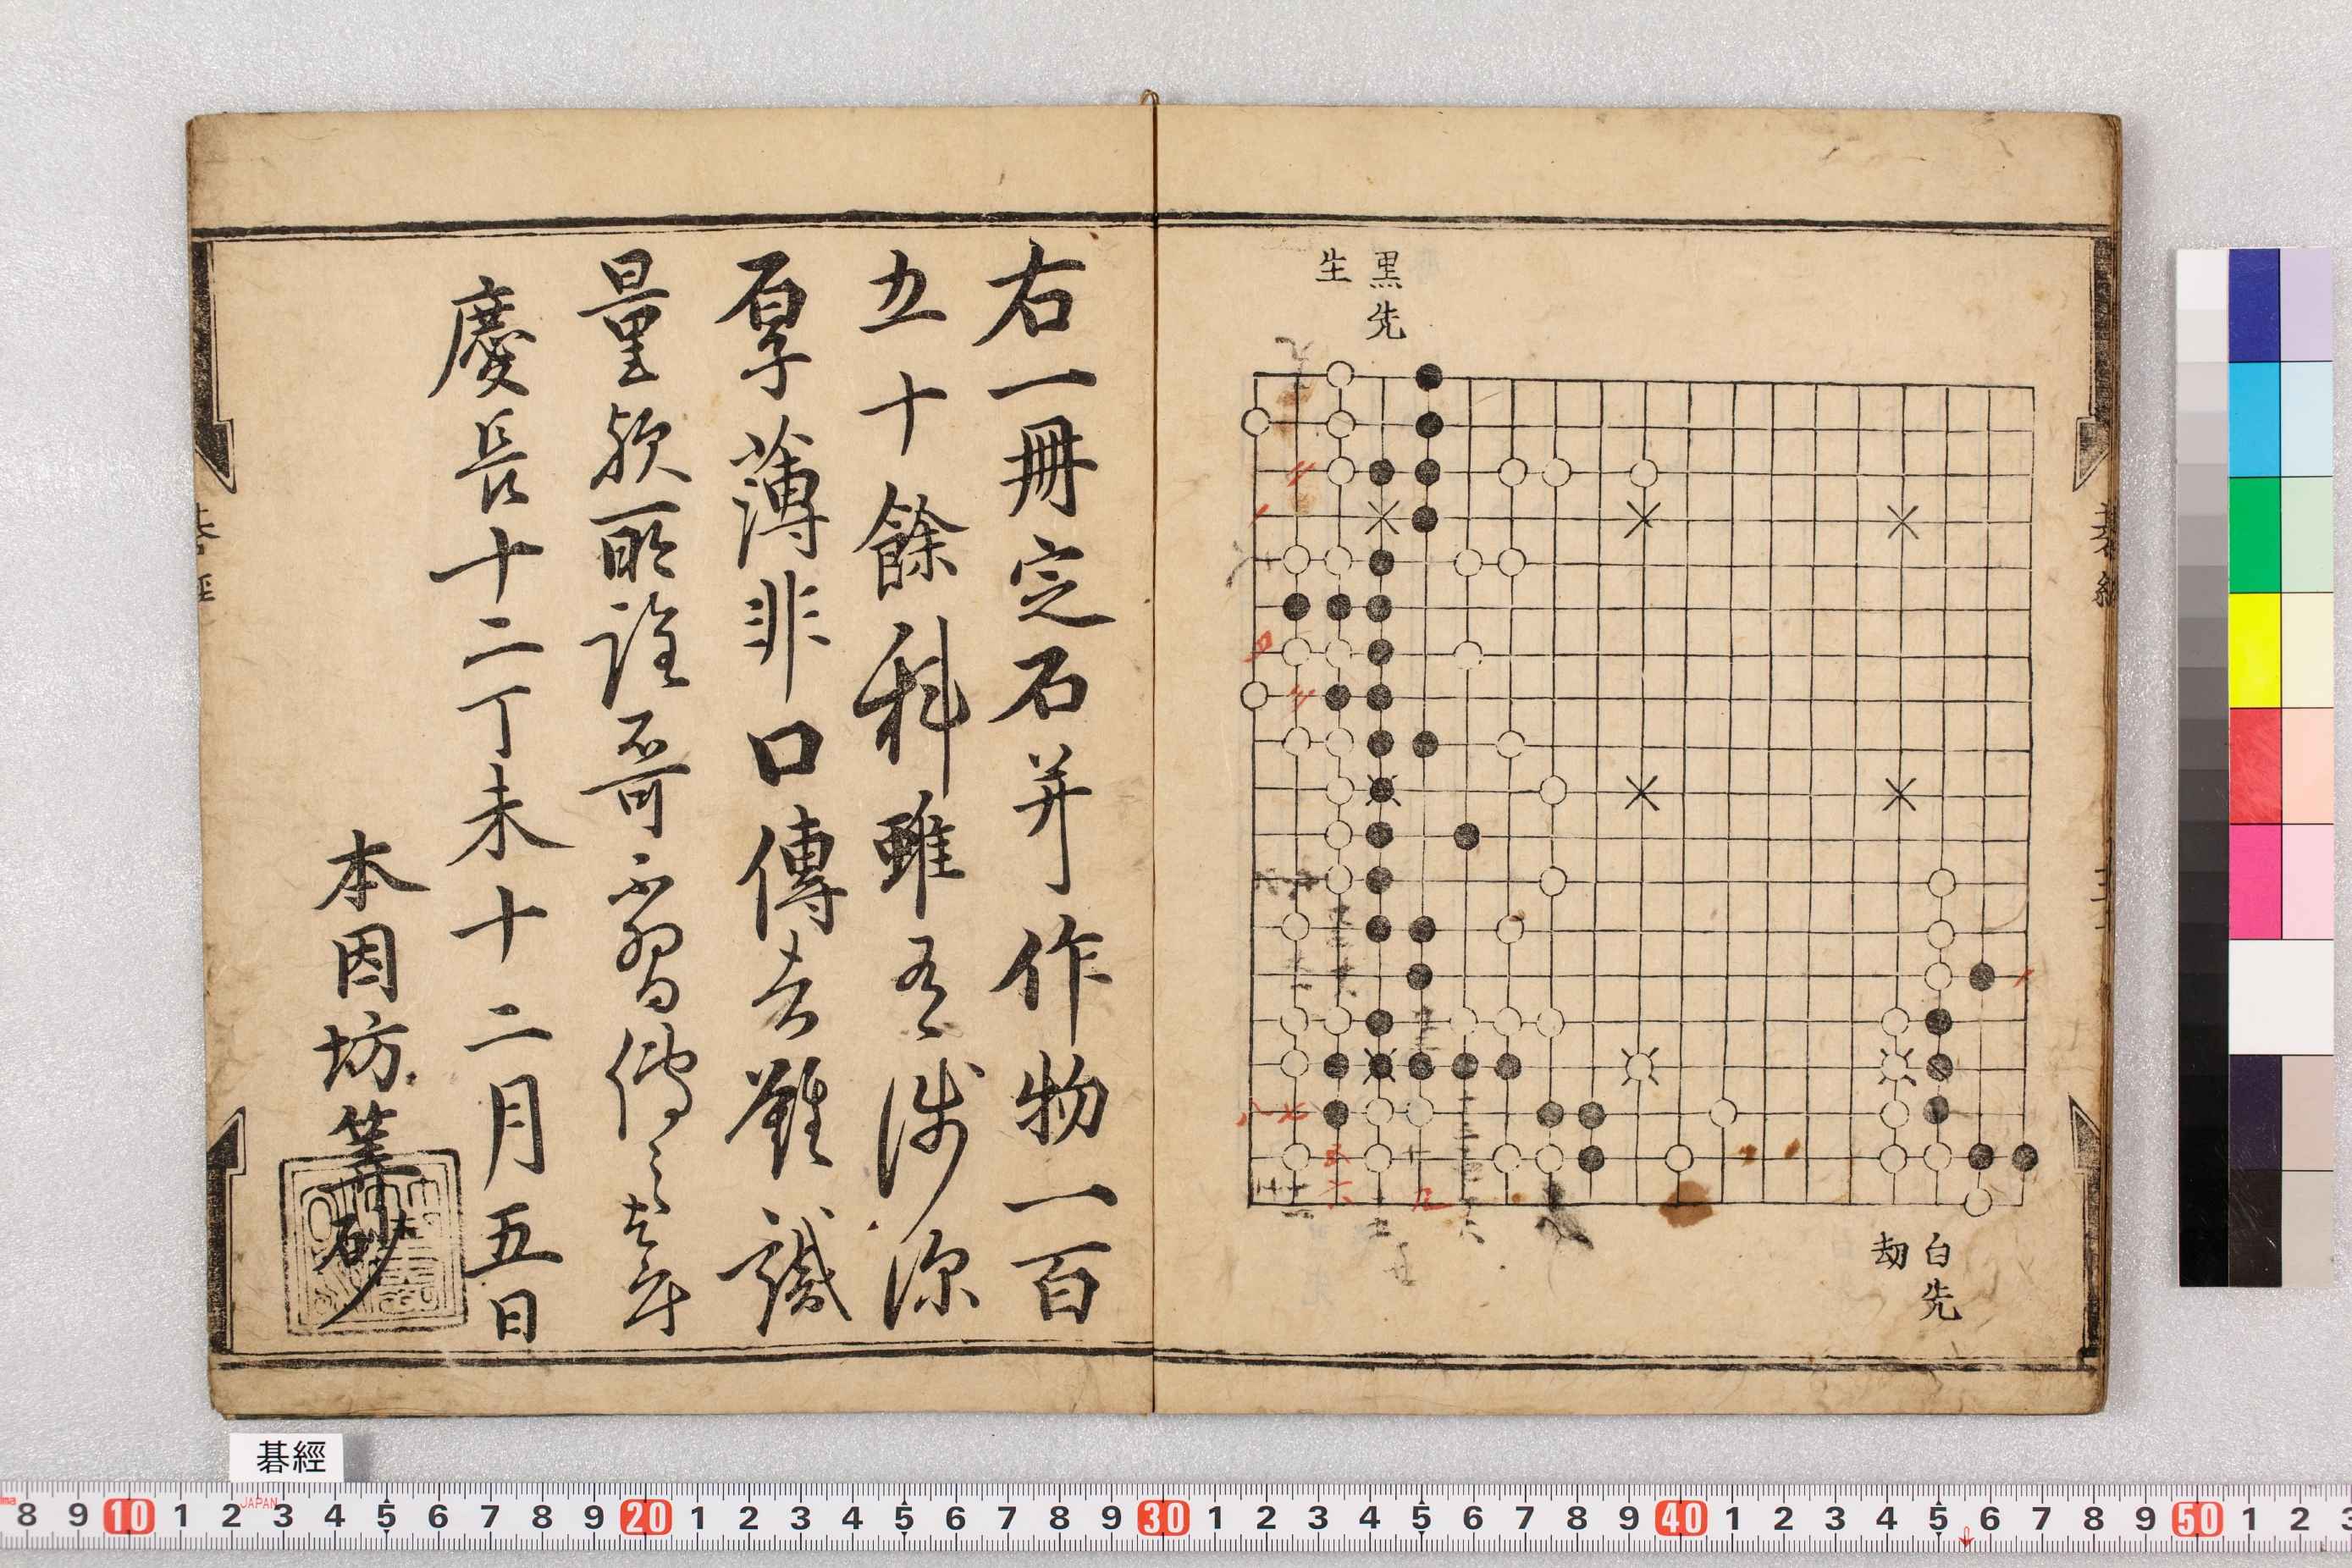 Extracted pages from 碁经.围棋.日本.本因坊算砂撰.庆长十二年.1607年跋_page-0001 (1).jpg